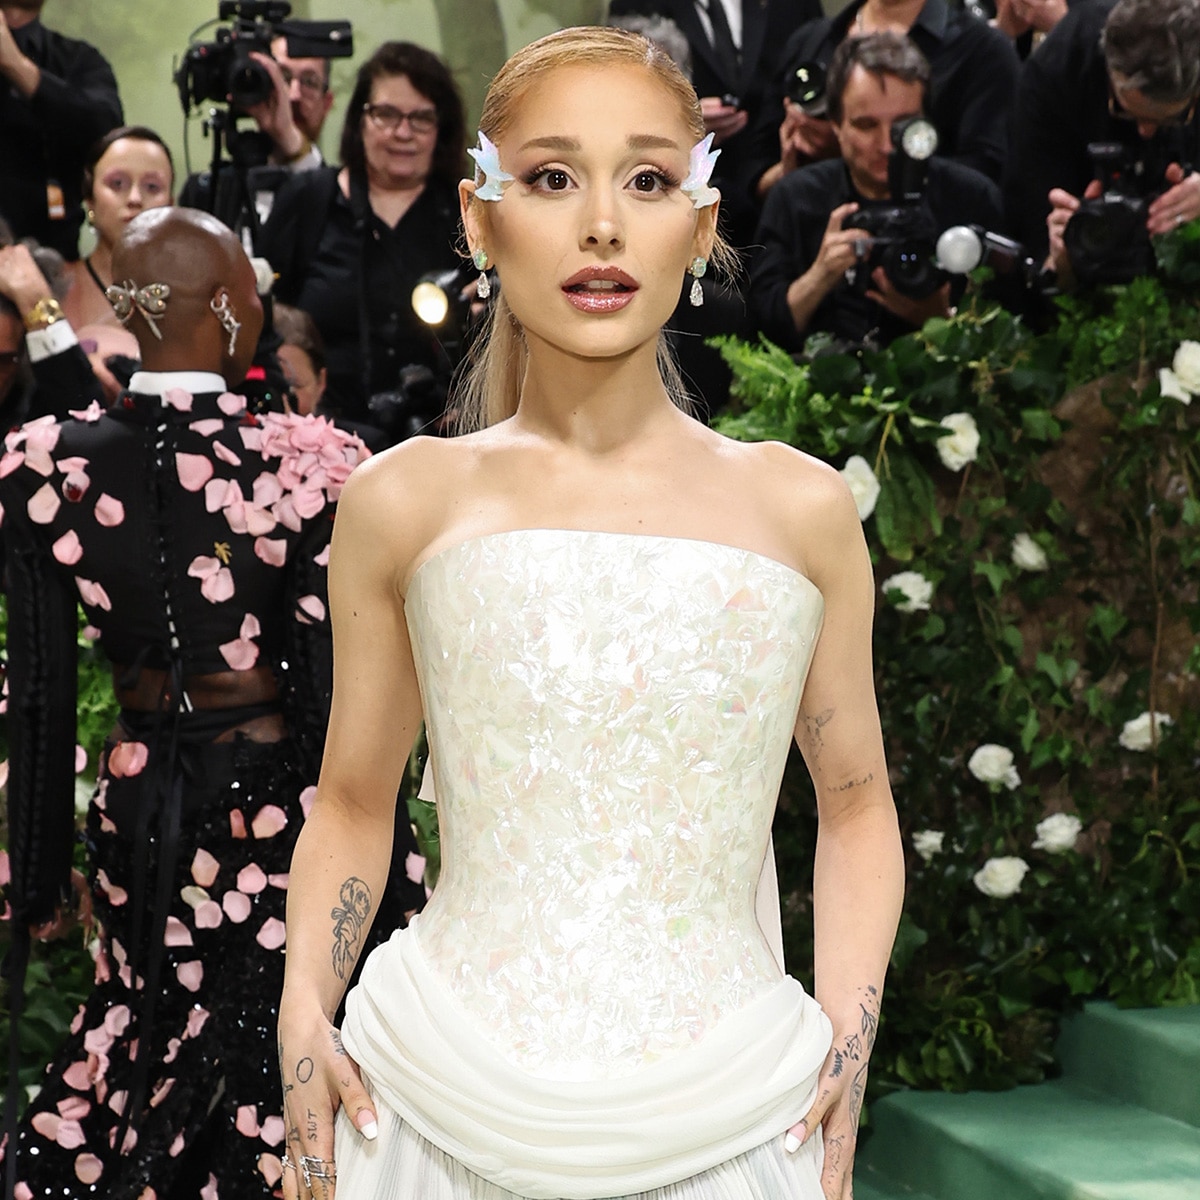 Ariana Grande's Met Gala Performance Featured a Wickedly Good Surprise